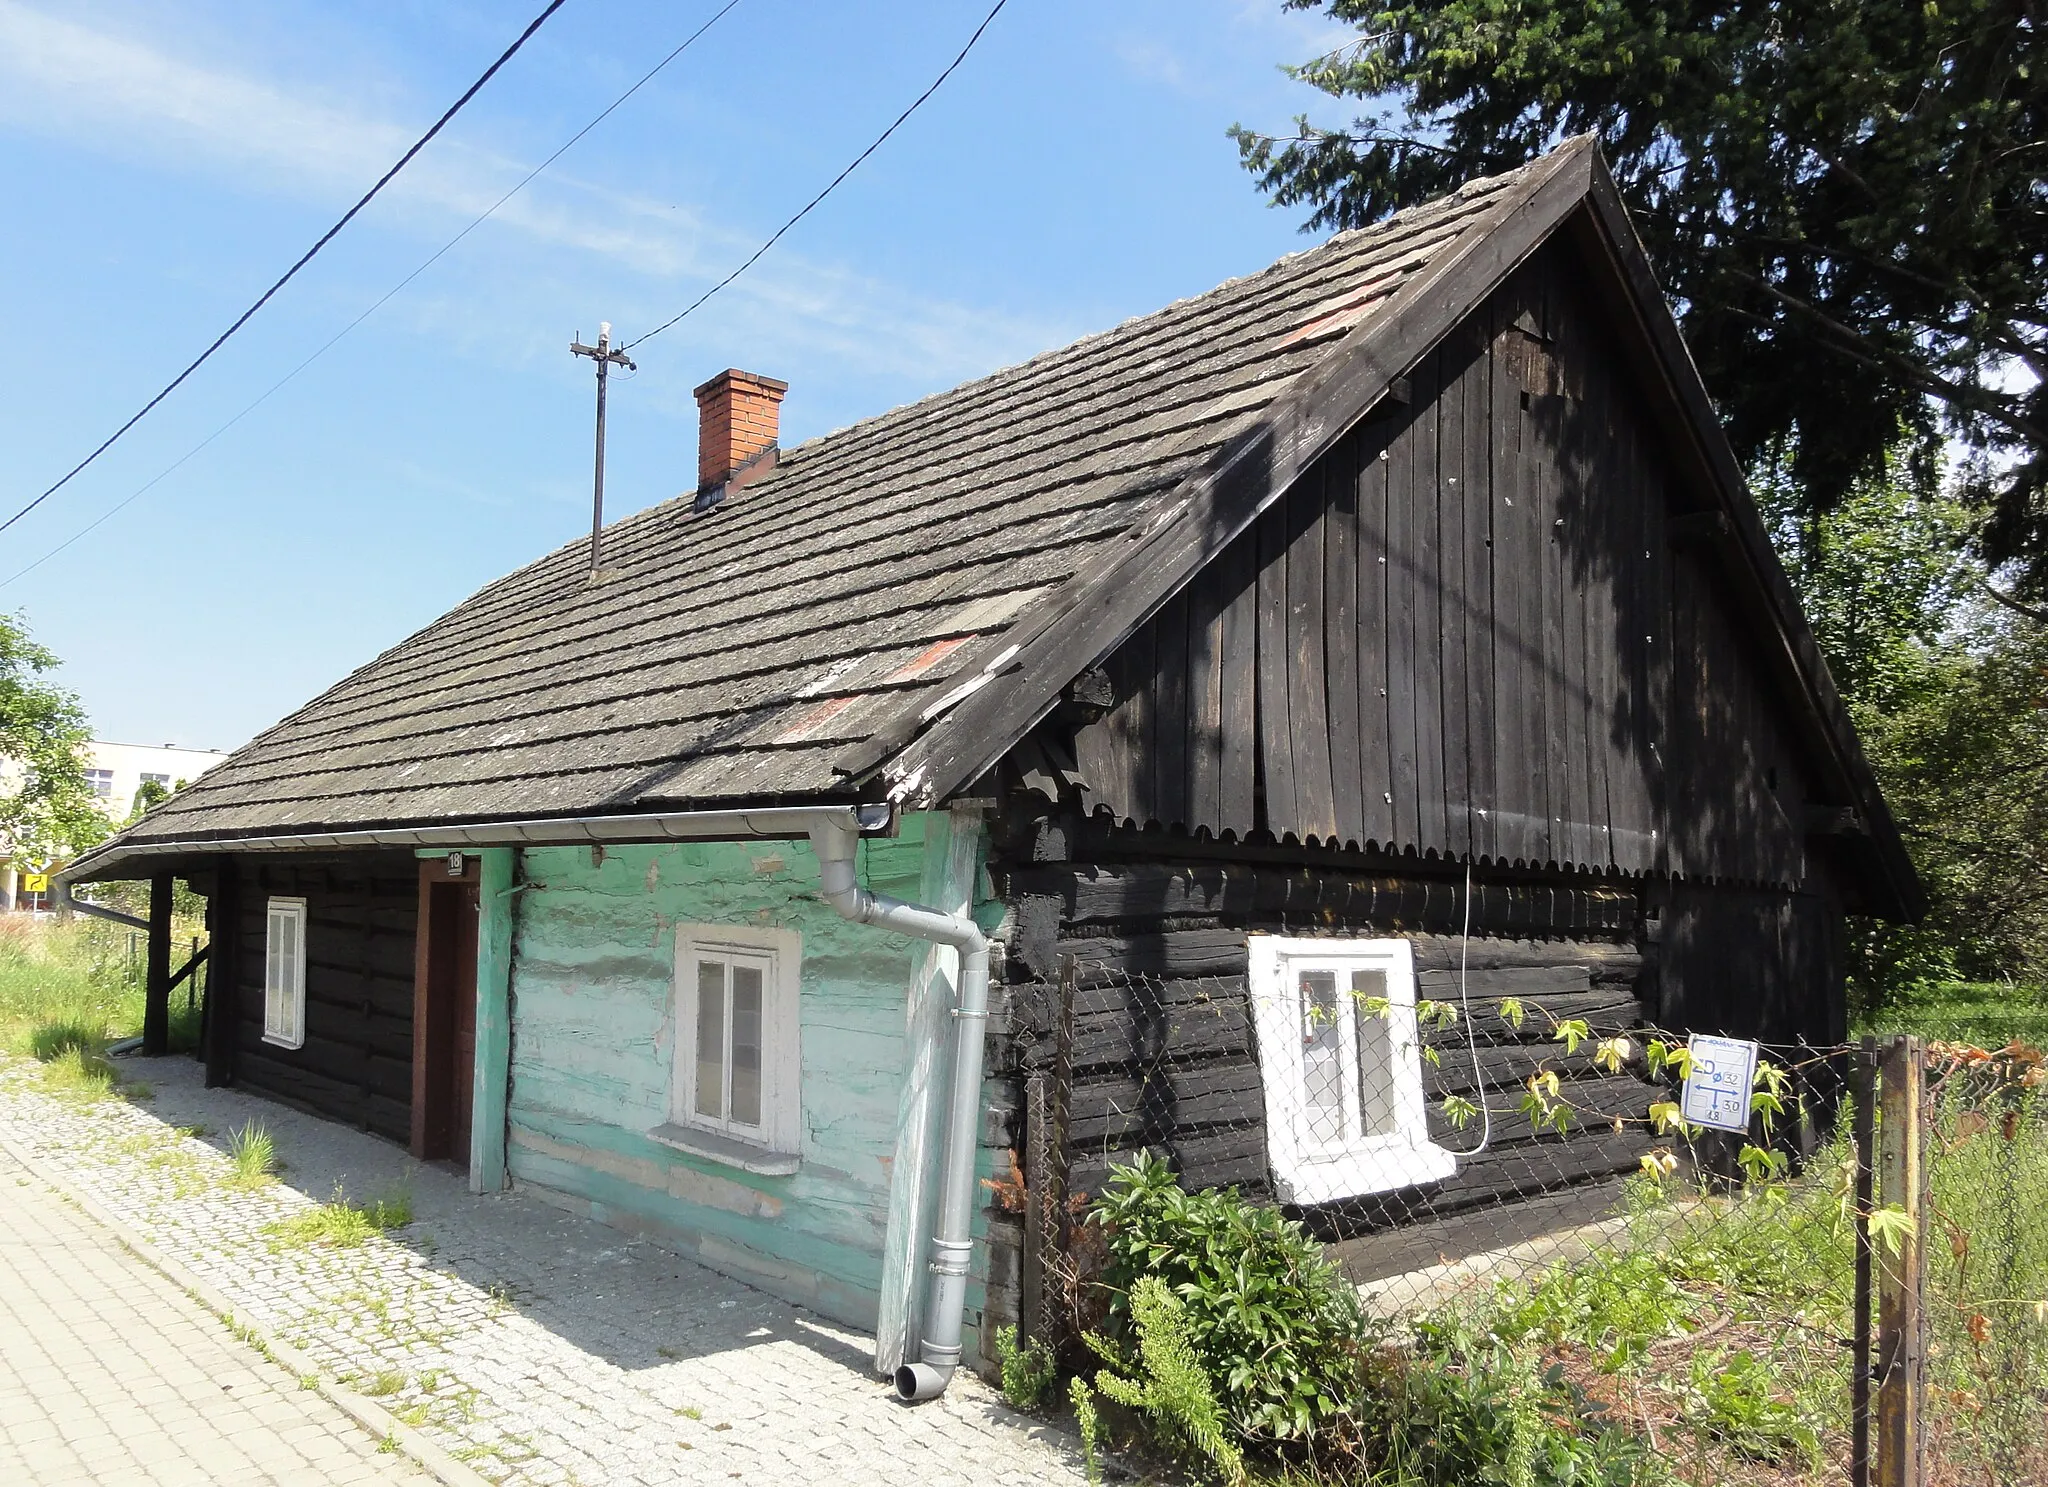 Photo showing: An old wooden house in Kobiernice